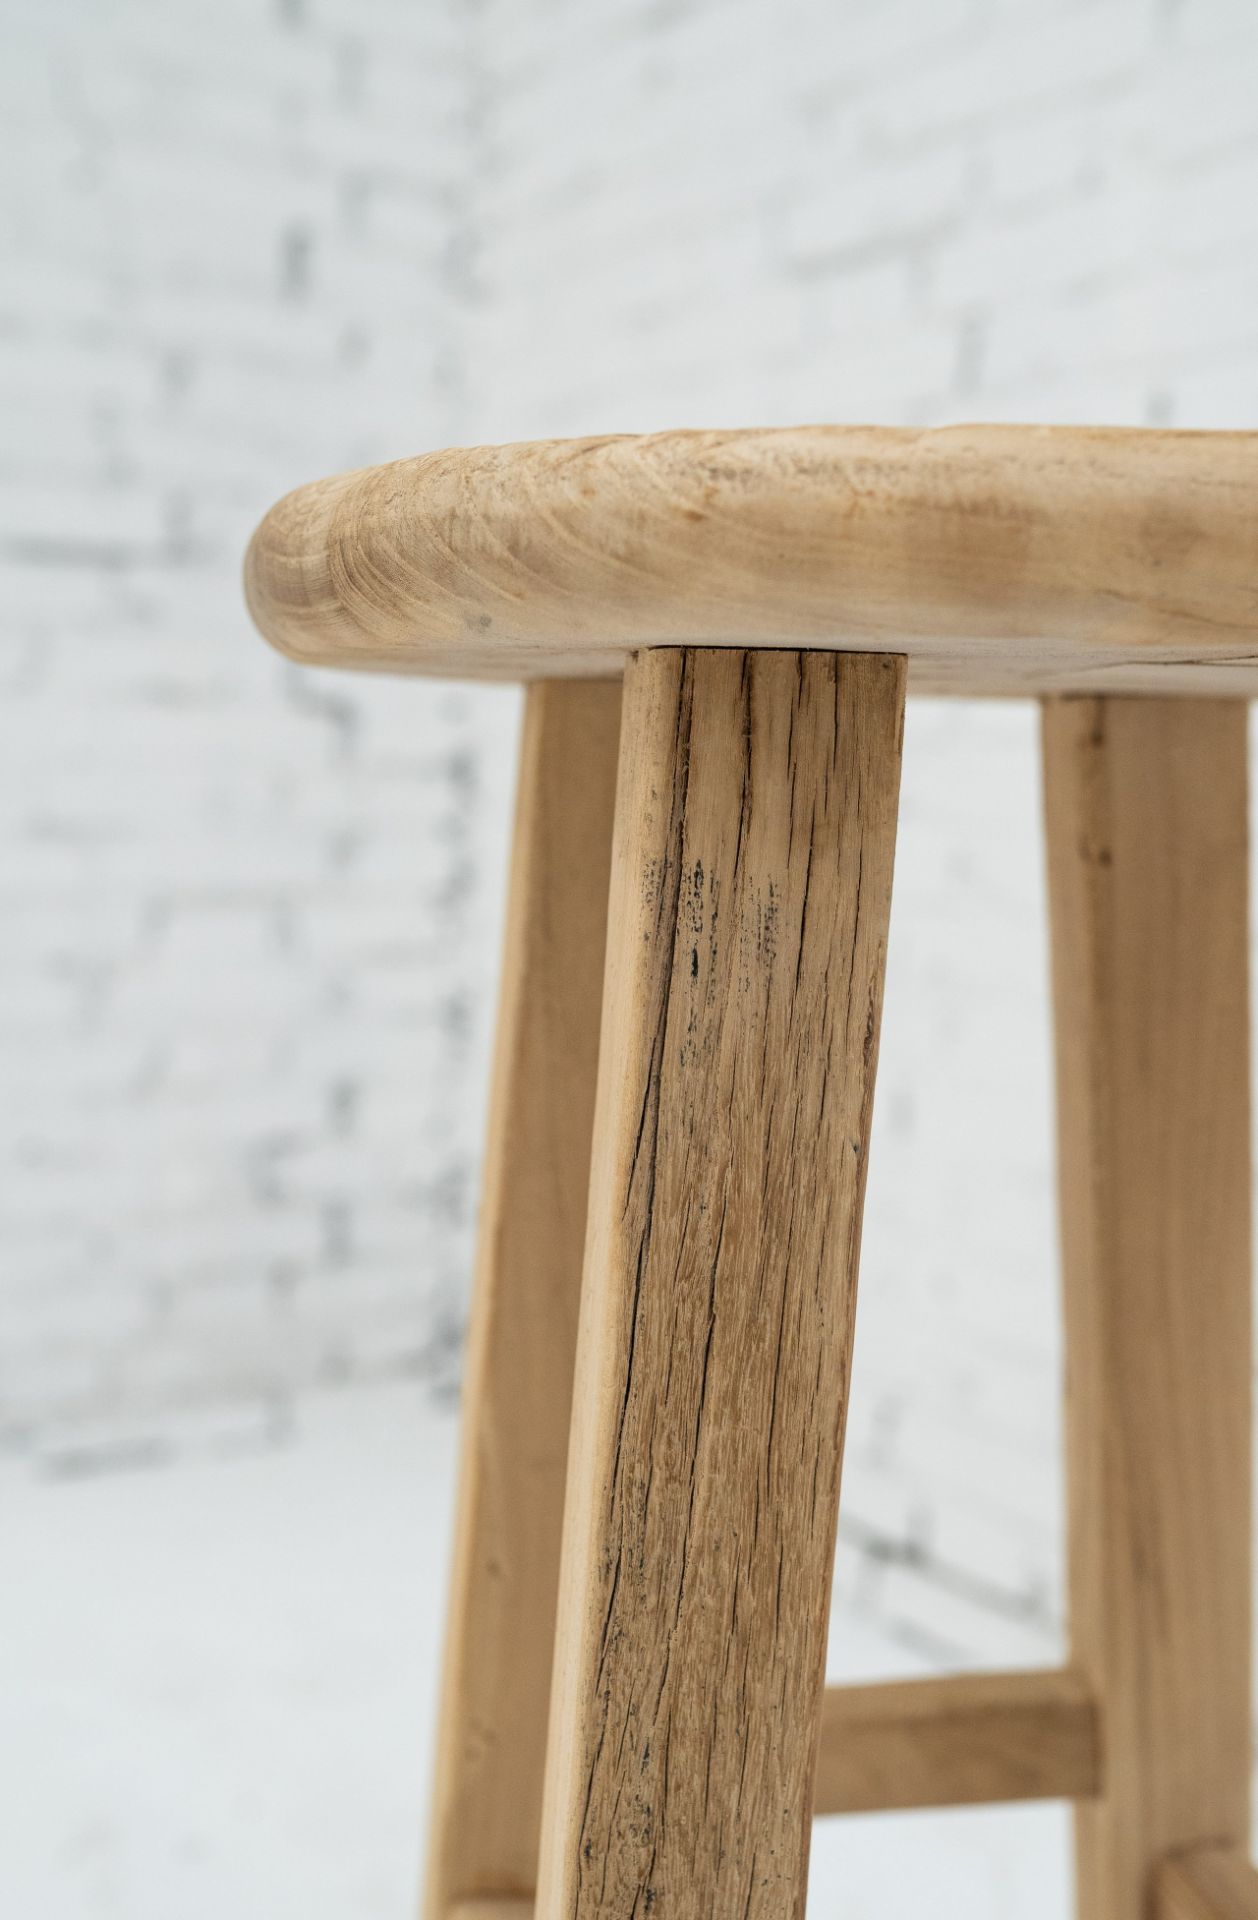 2 x Tall Elm Stool: Stunning wooden bar stools from the Heibei provence of China. - Image 3 of 5